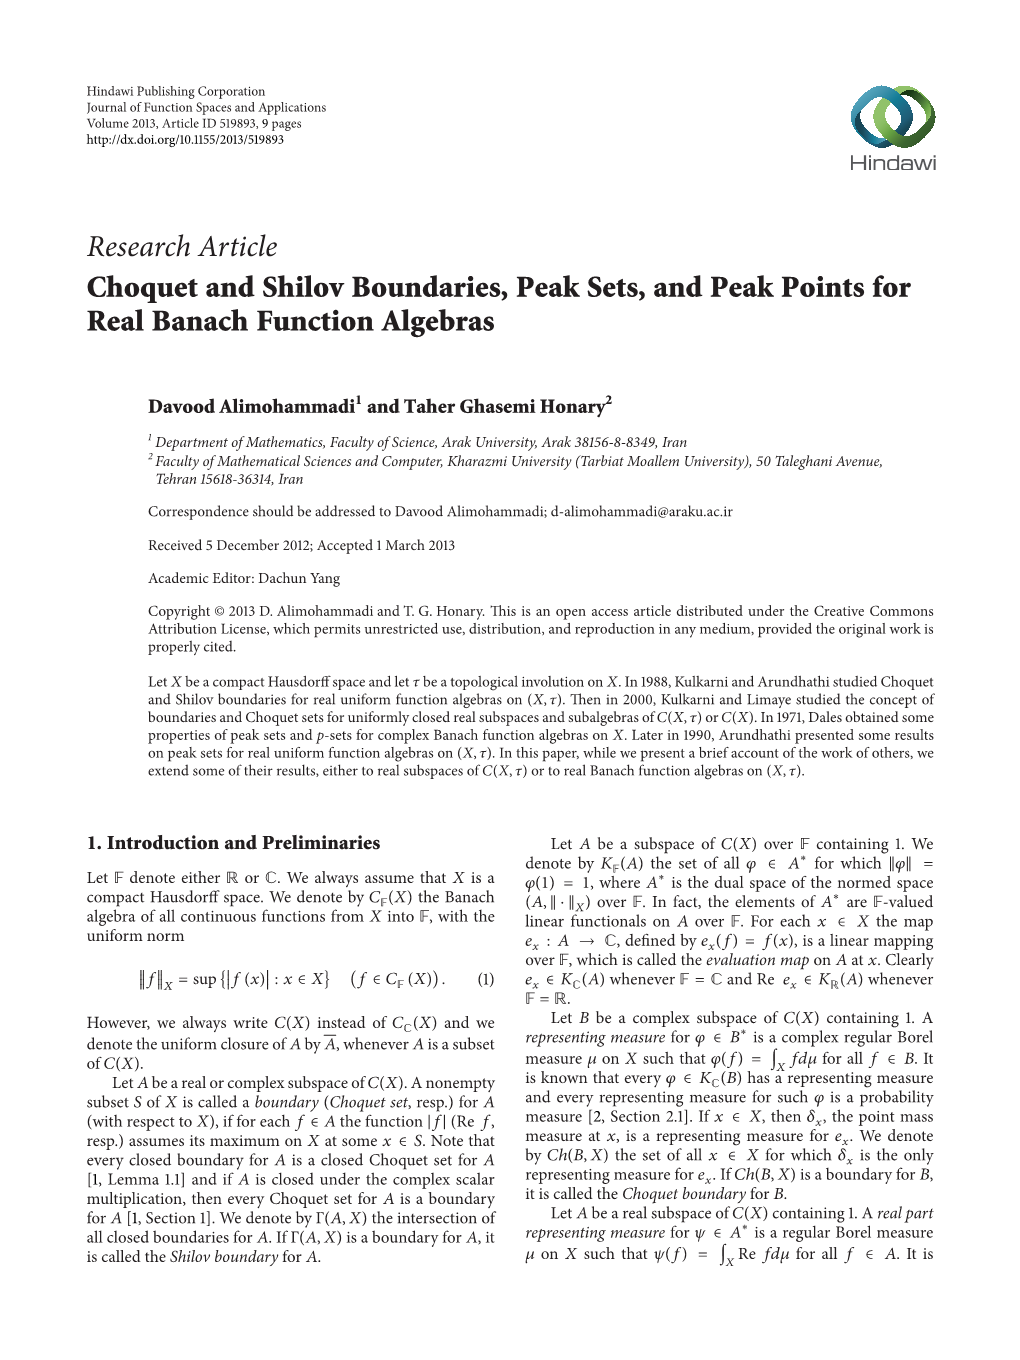 Choquet and Shilov Boundaries, Peak Sets, and Peak Points for Real Banach Function Algebras